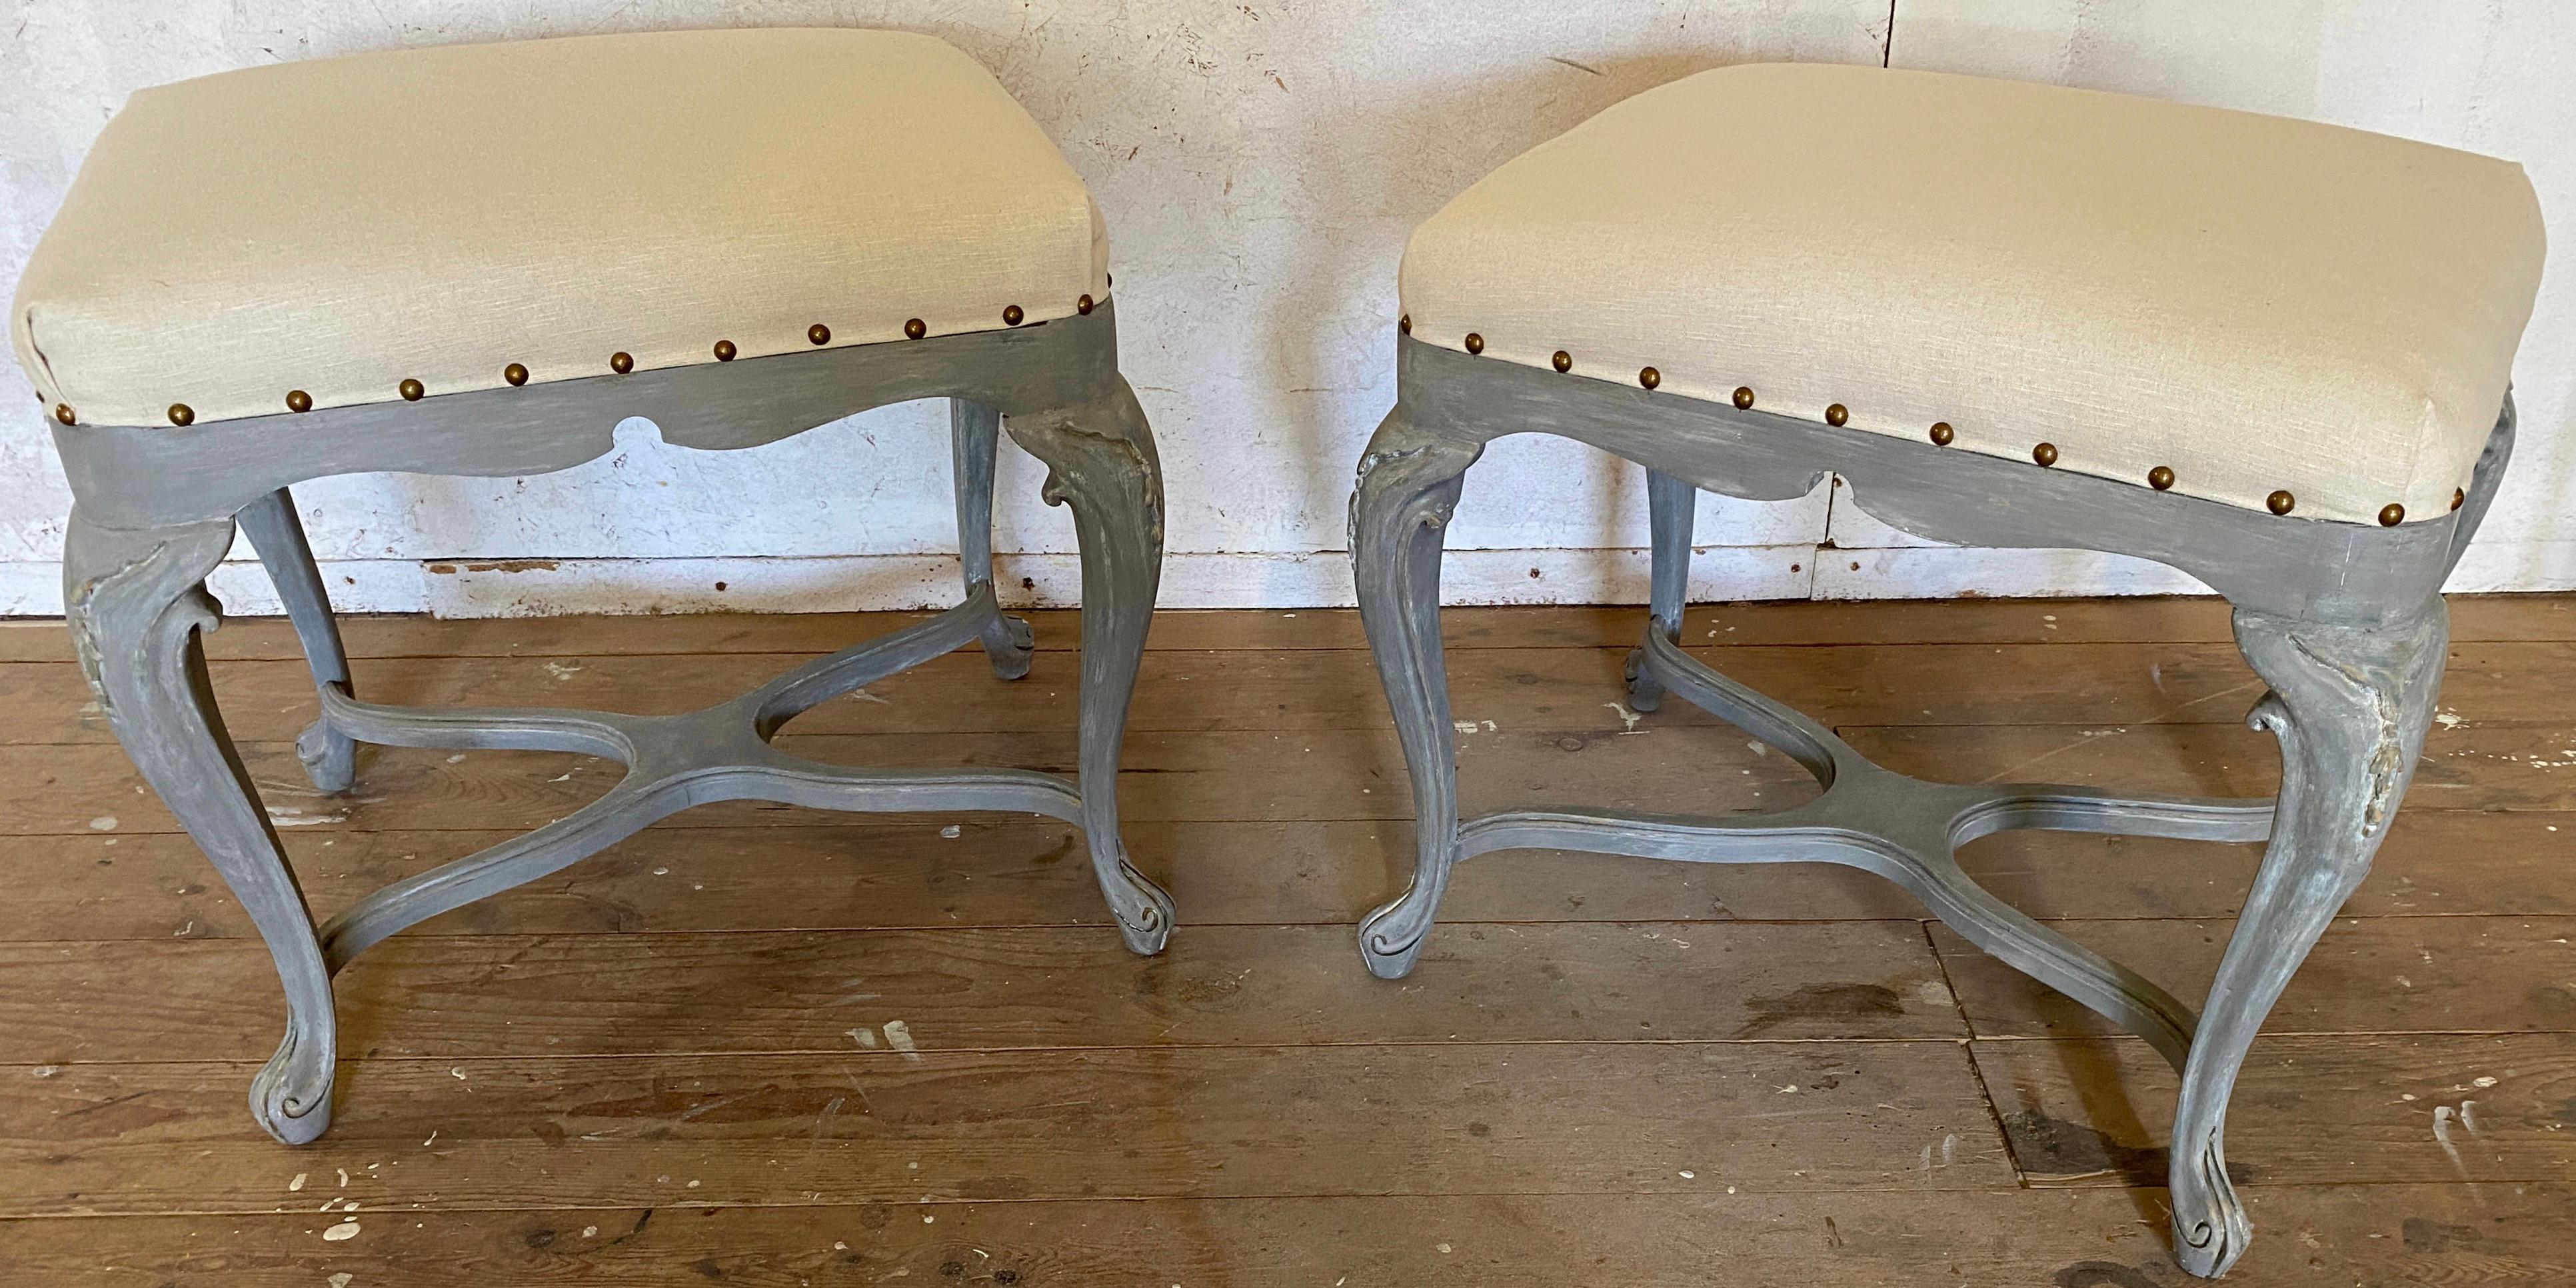 Pair of French Louis XV style painted side tables or stools with upholstered top. Use as stools for extra seating. Rococo Style grey painted tables or stools, vanity stool or chair.
Search terms: Swedish Gustavian style, Italian rococo.
 